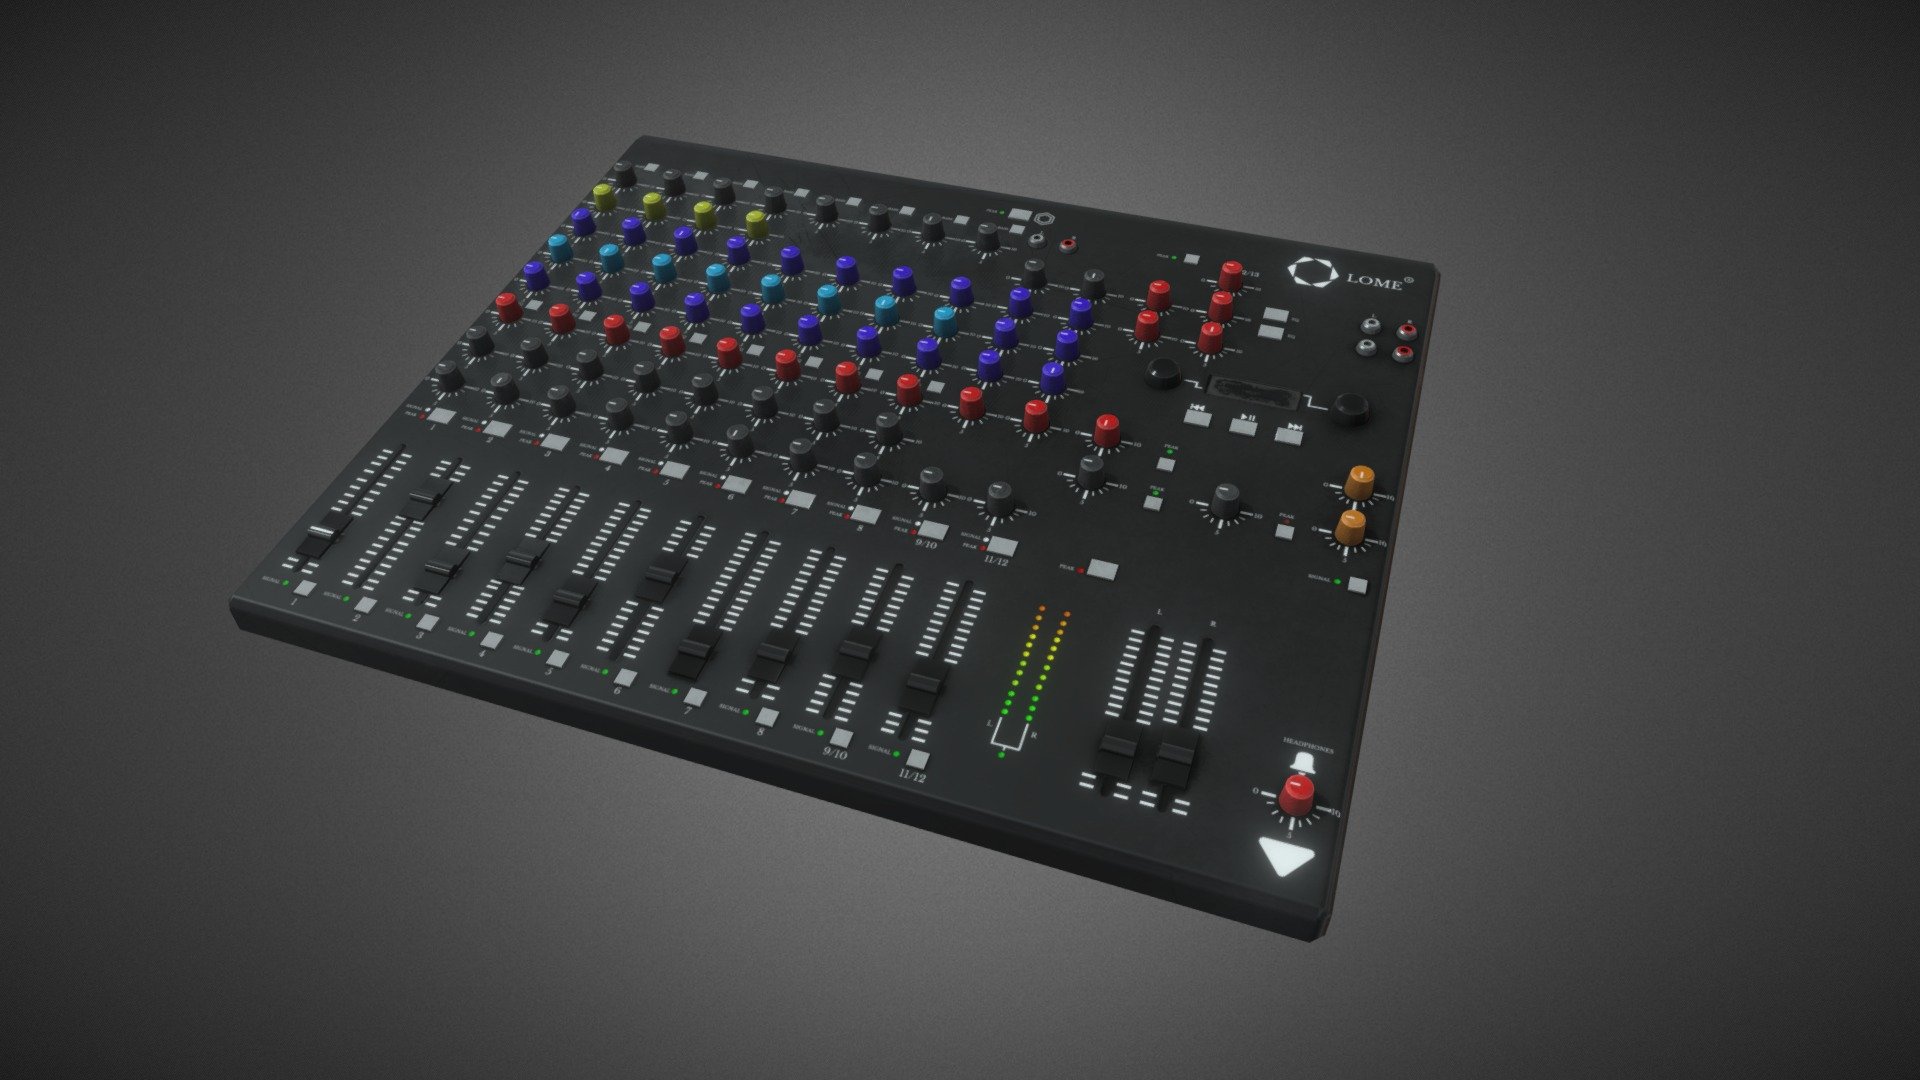 Fictional soundboard (Lome brand) made in blender, unwrapped and with PBR 4K materials Polygon count: Vertices: 5640 Triangles: 10672 Number of materials: 1 Types of materials and texture maps and number of textures: PBR (BaseColor, AO, Curve, Height, Metallic, Roughness and Normal) - 1 Texture Texture dimensions: 4096x4096 UV mapping: Yes Rigging: No Animated: No - Lome Soundboard - 3D model by zombitt 3d model